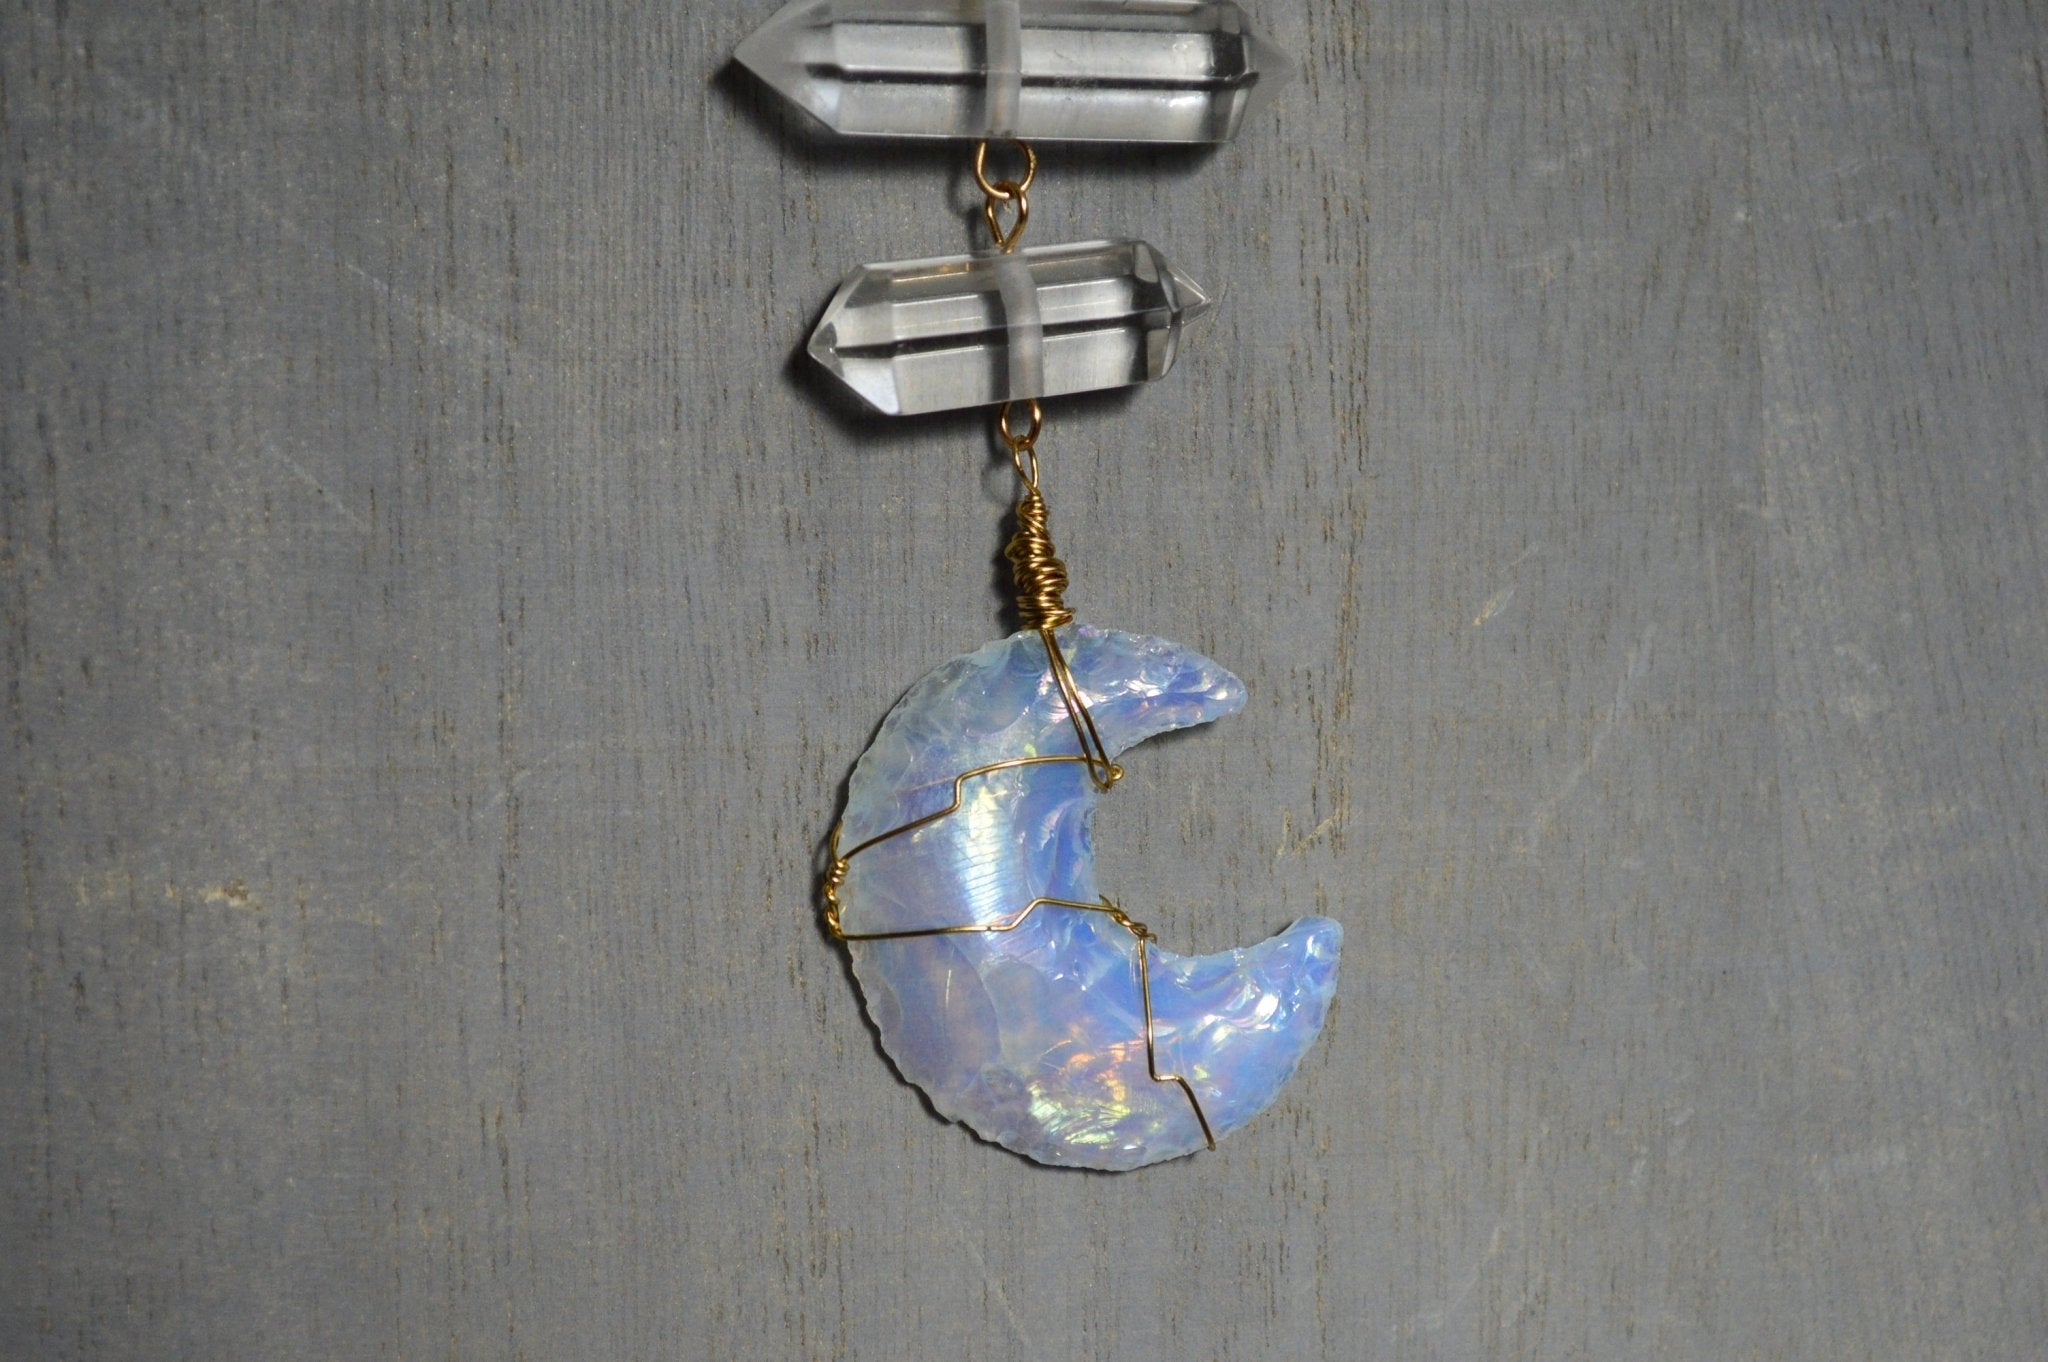 Planets Aligned - Opalite Waning Crescent Moon Brass Necklace - We Love Brass